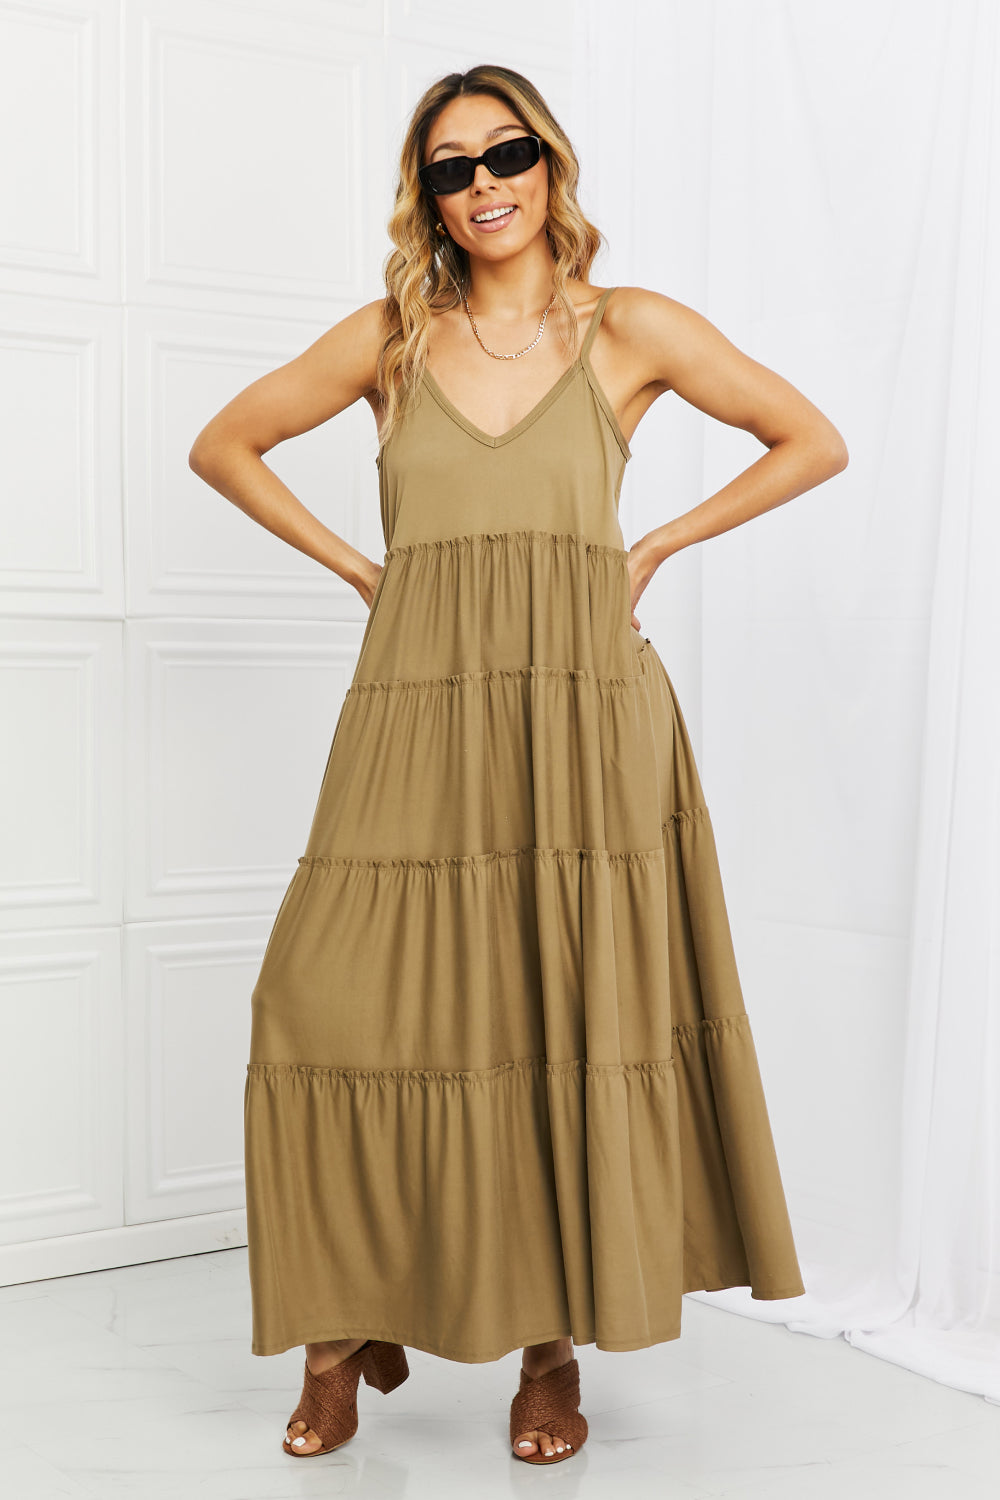 Explore our collection of chic spaghetti strap dresses. From casual to formal, these dresses offer versatile style. Shop now for the perfect outfit!